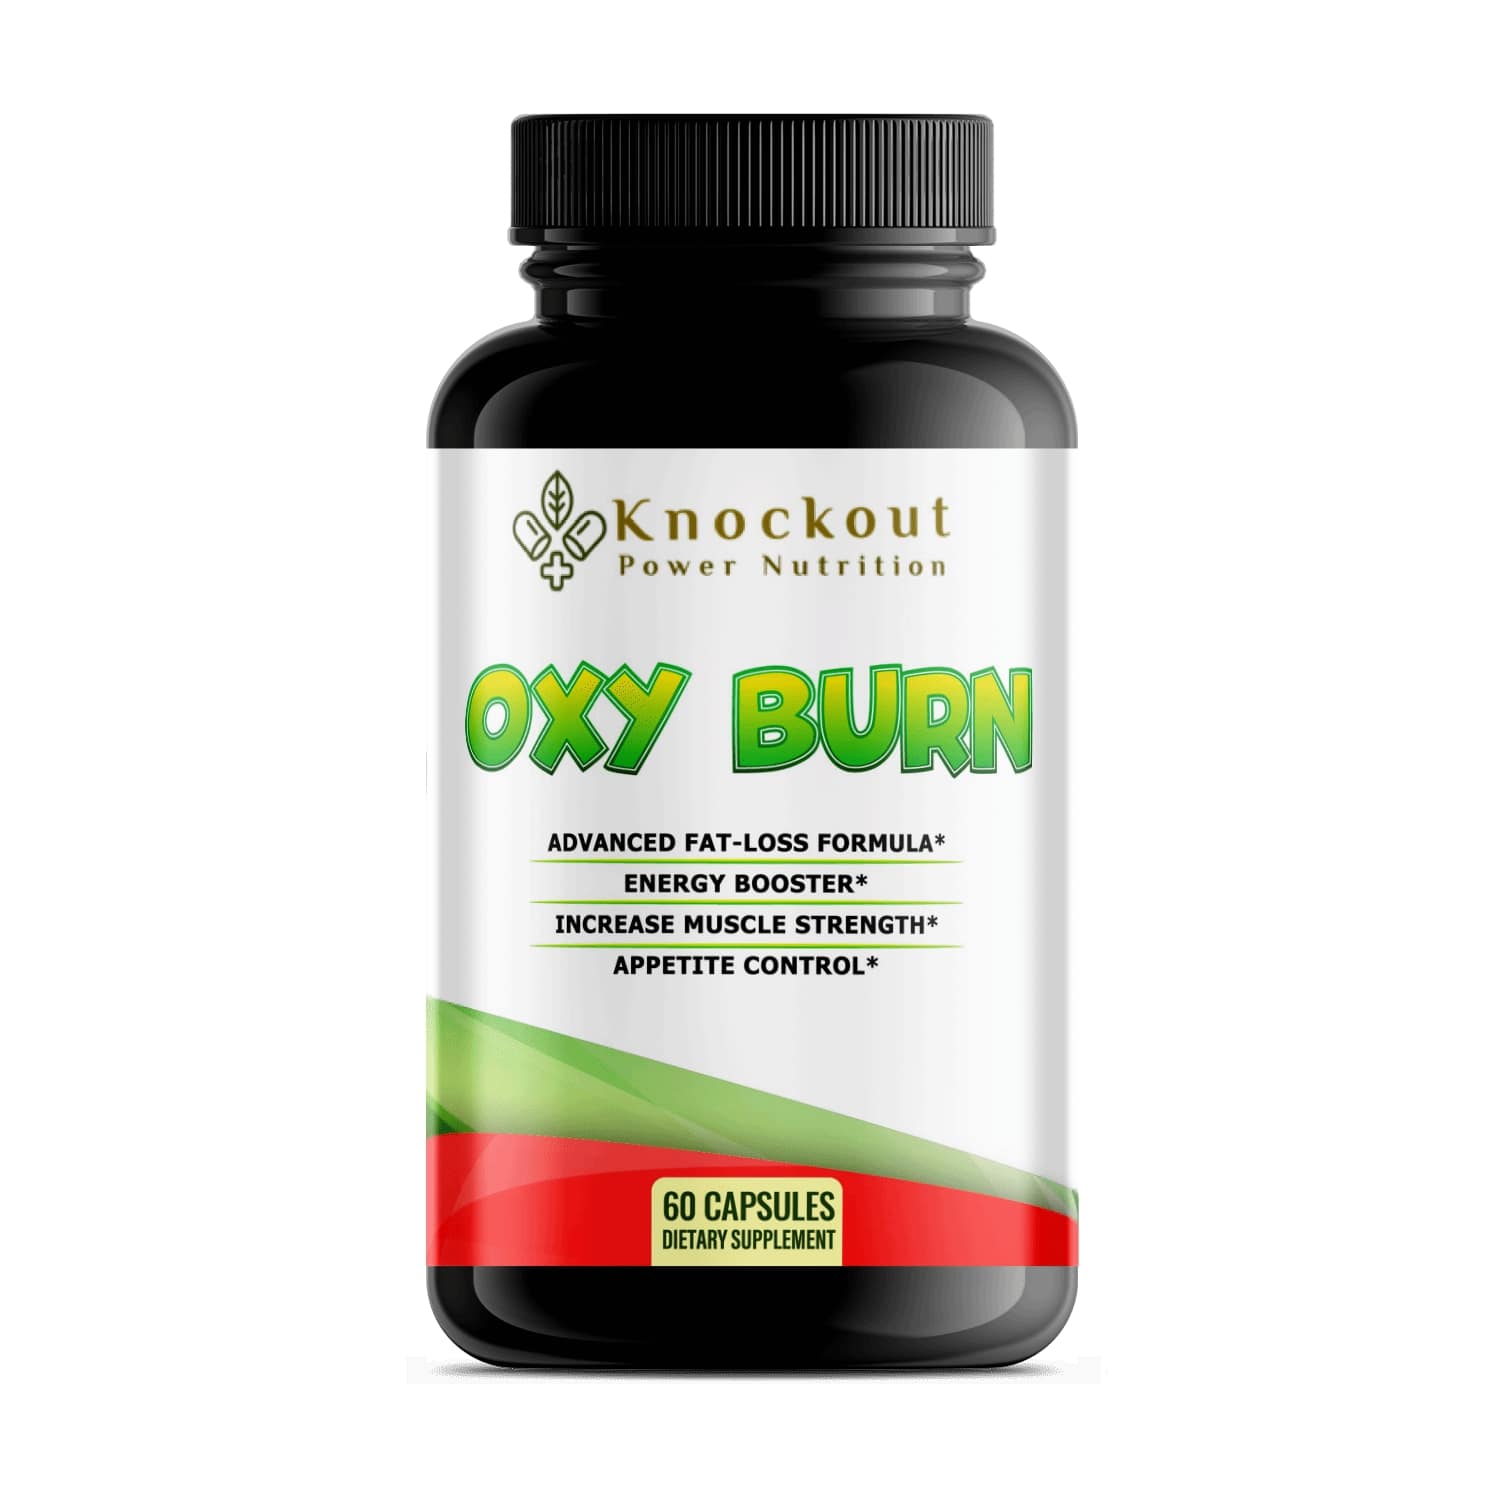 Oxy Burn - Weightloss - Appetite Control